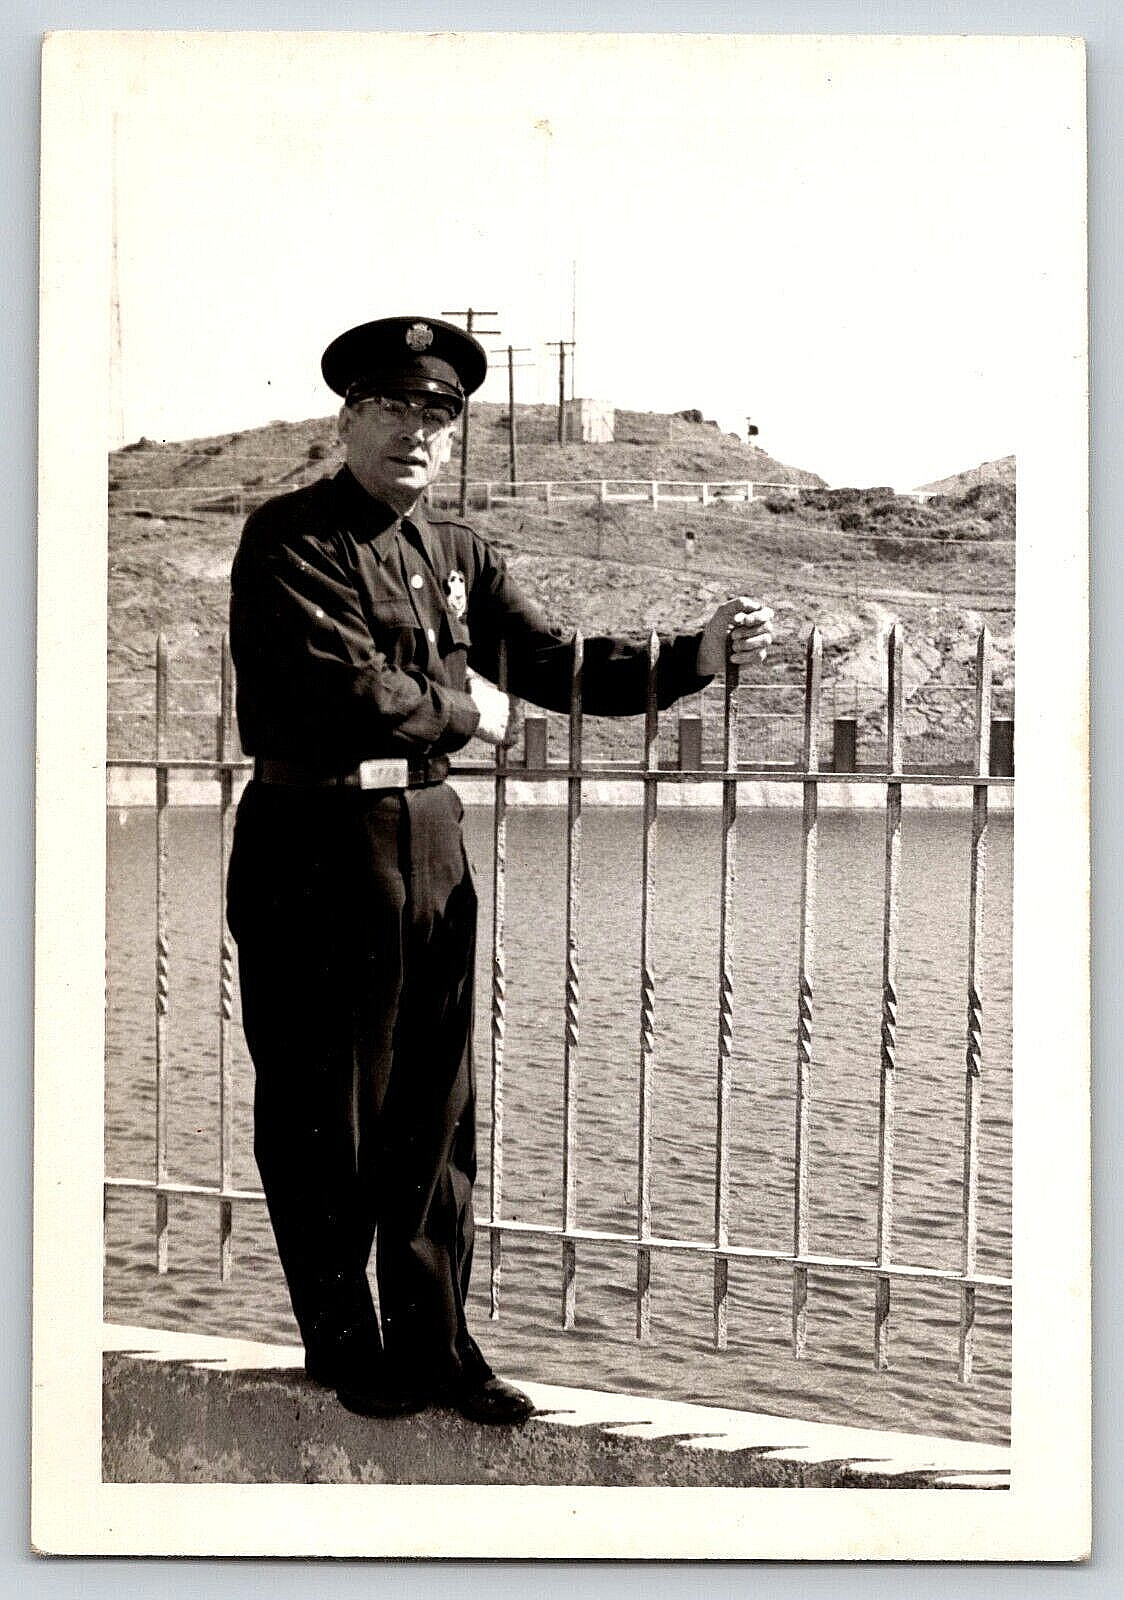 Policeman Guard Standing By Fence Antique Vintage B&W Photograph Snapshot OOAK